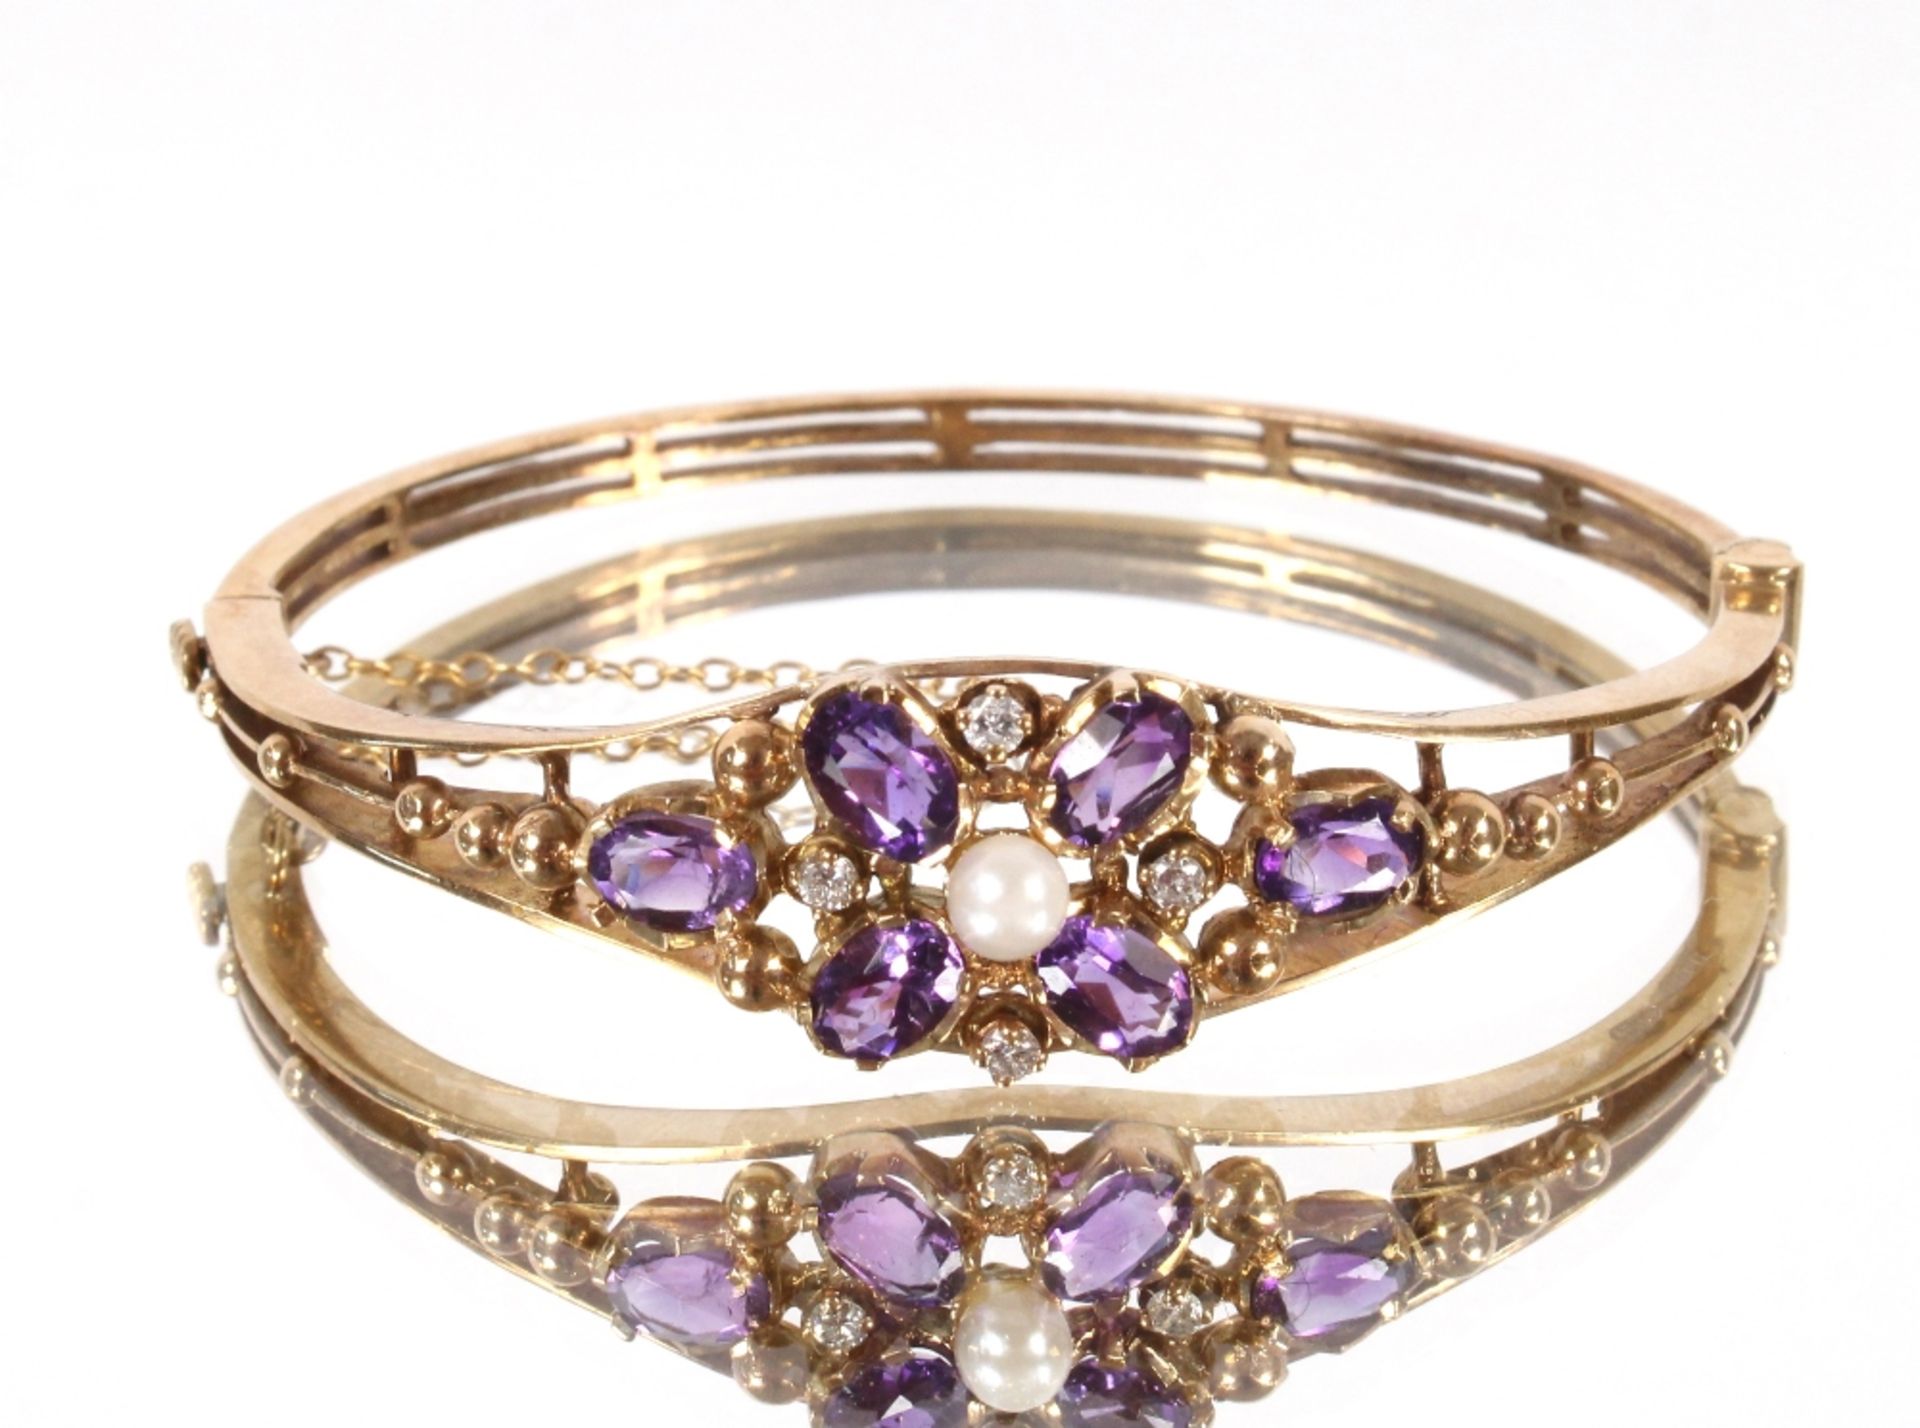 A 9ct gold diamond and amethyst bangle, the centra